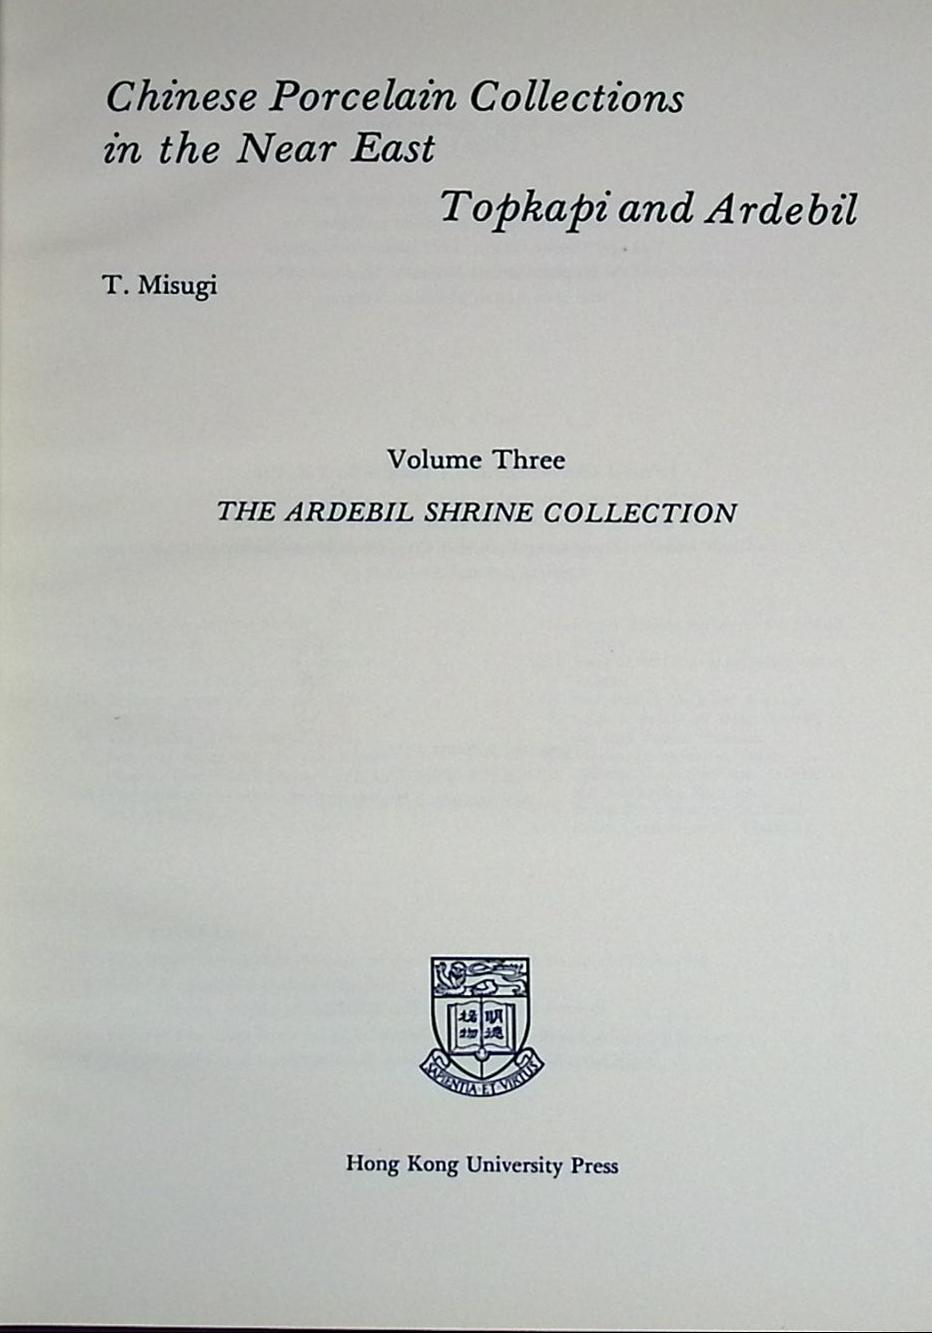 Chinese Porcelain Collections in the Near East Tophapi and Ardebil. 3 volume set.